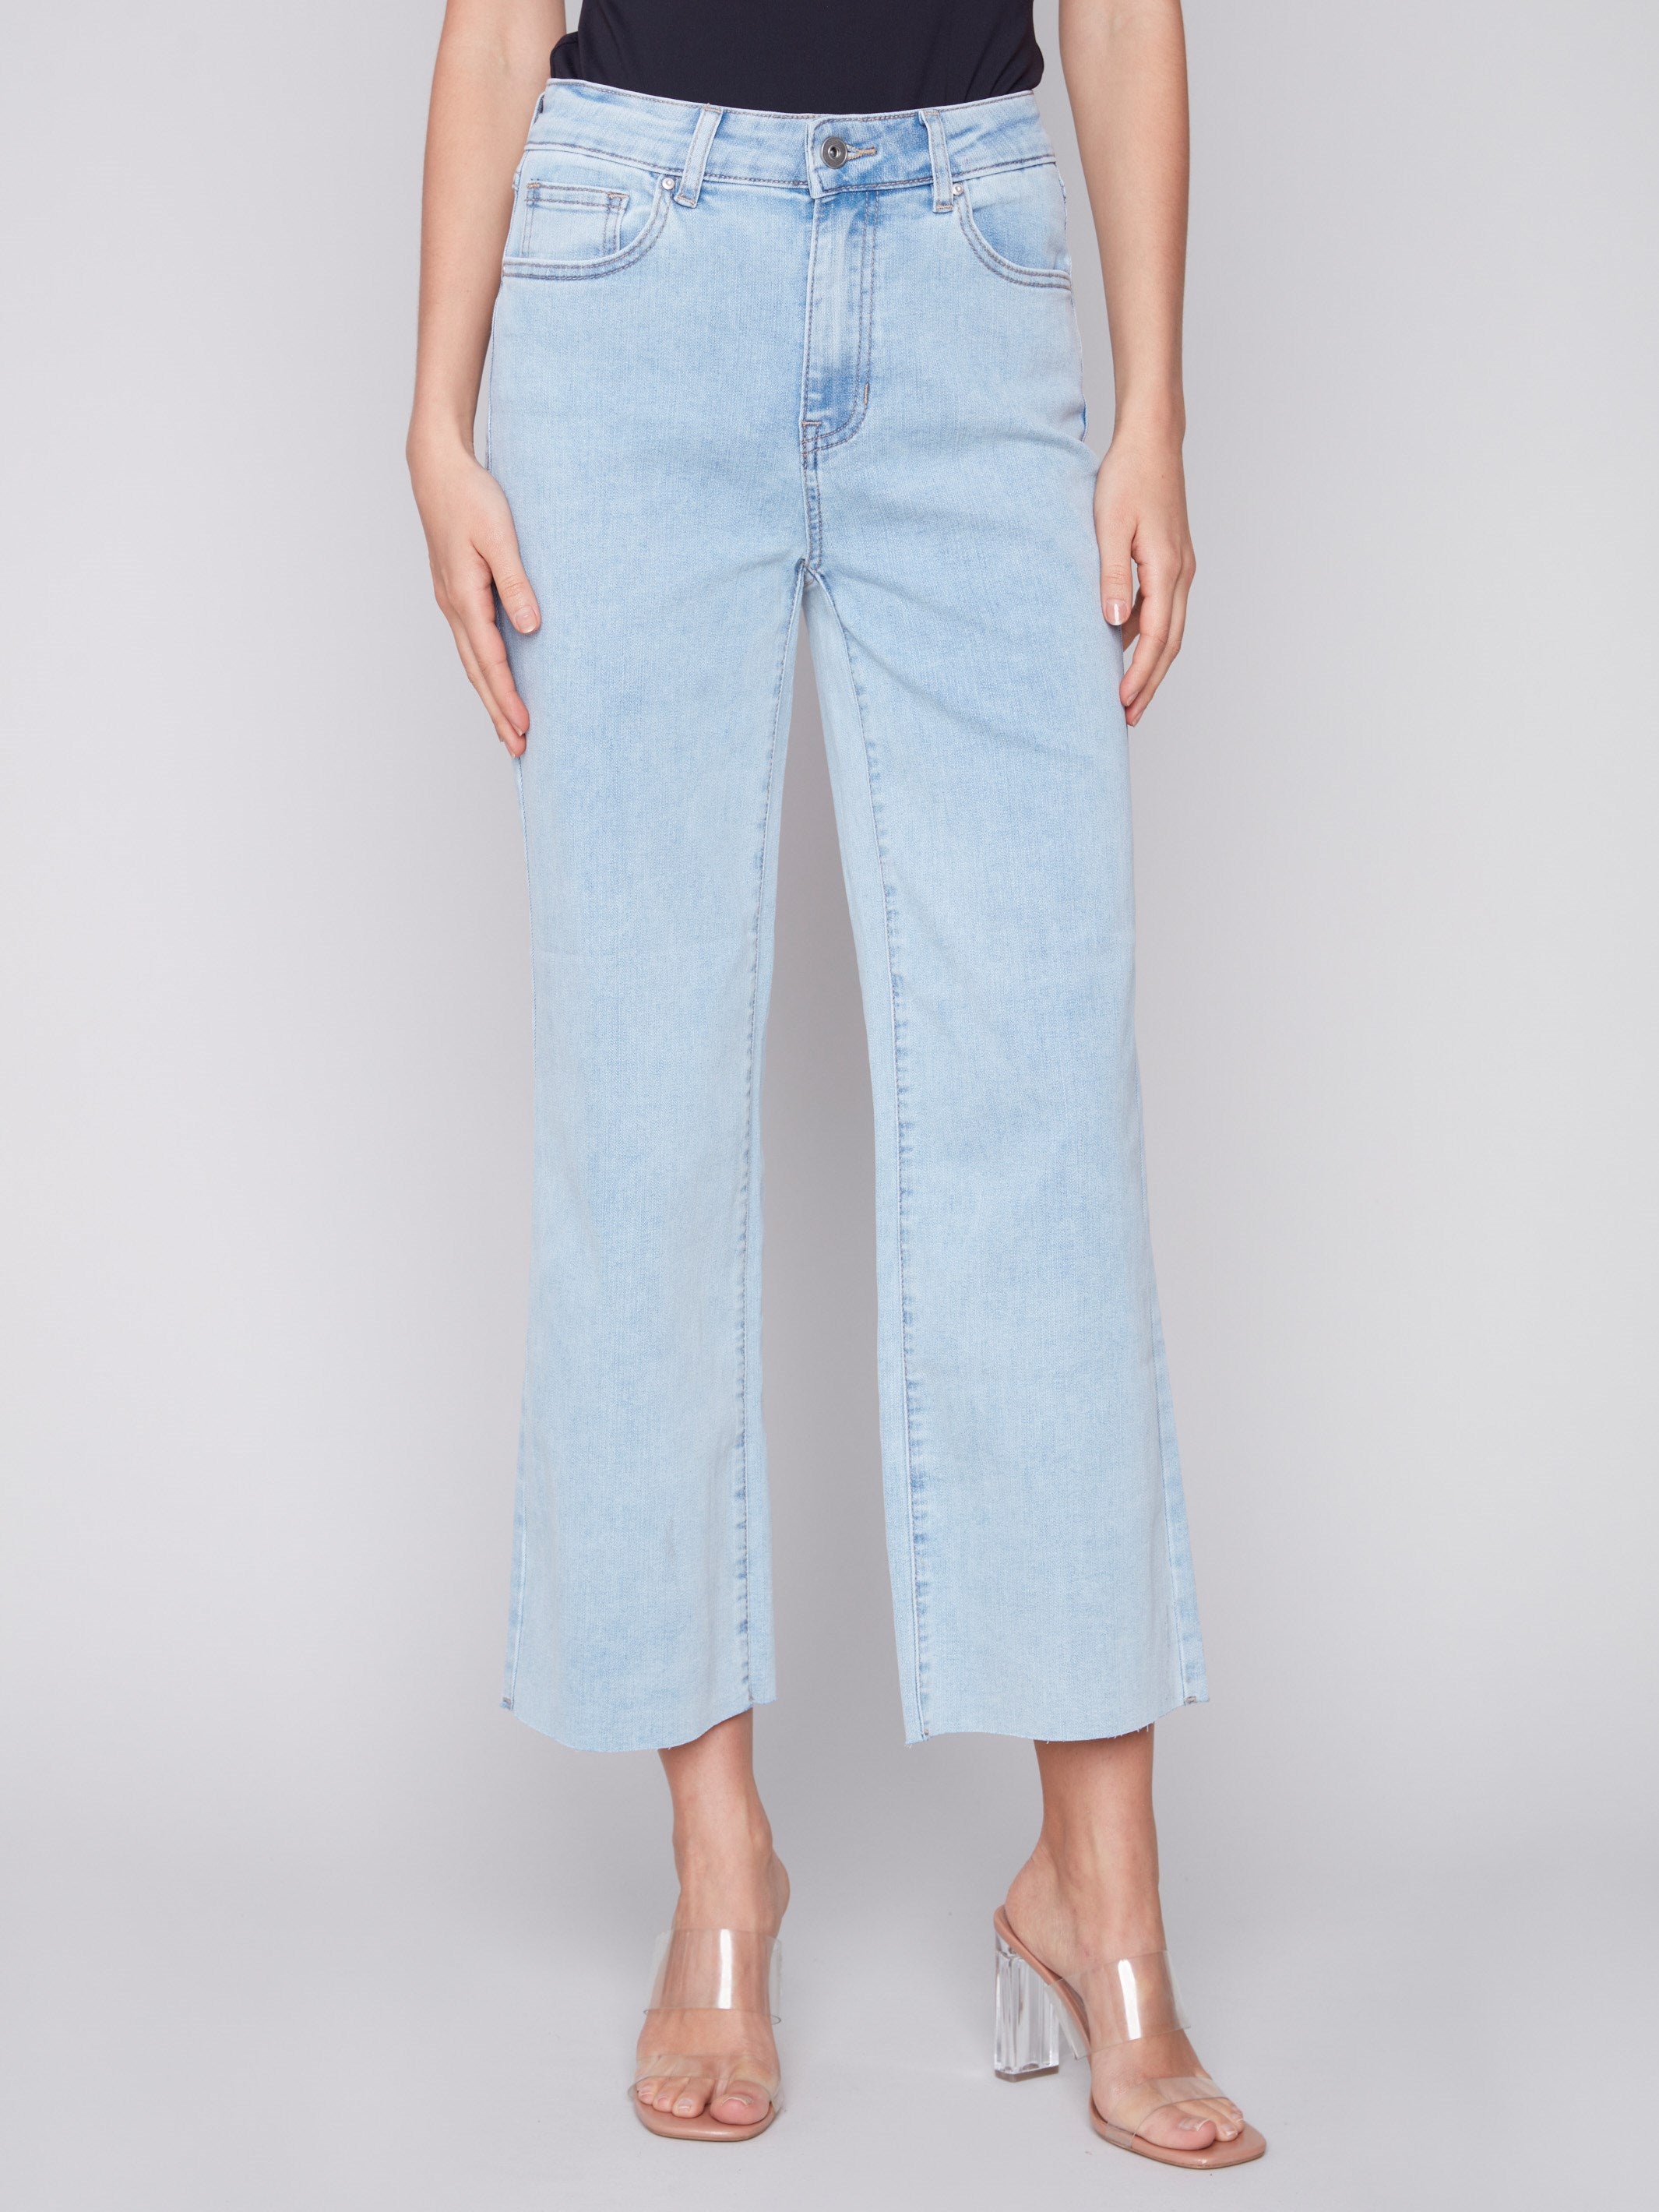 Charlie B Flared Jeans with Raw Edge - Bleach Blue - Image 2